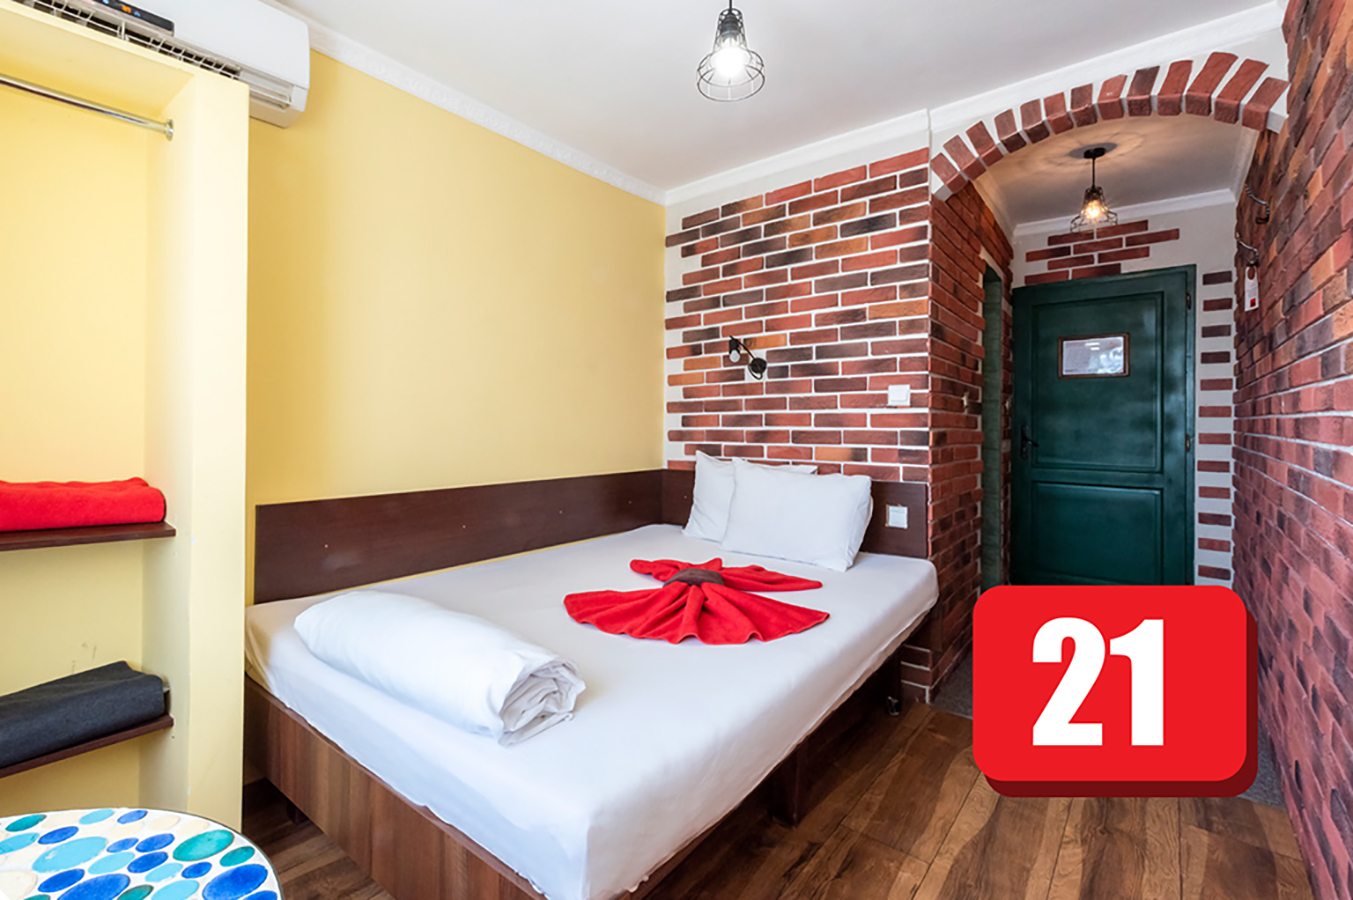 Single room with one single bed Number 21